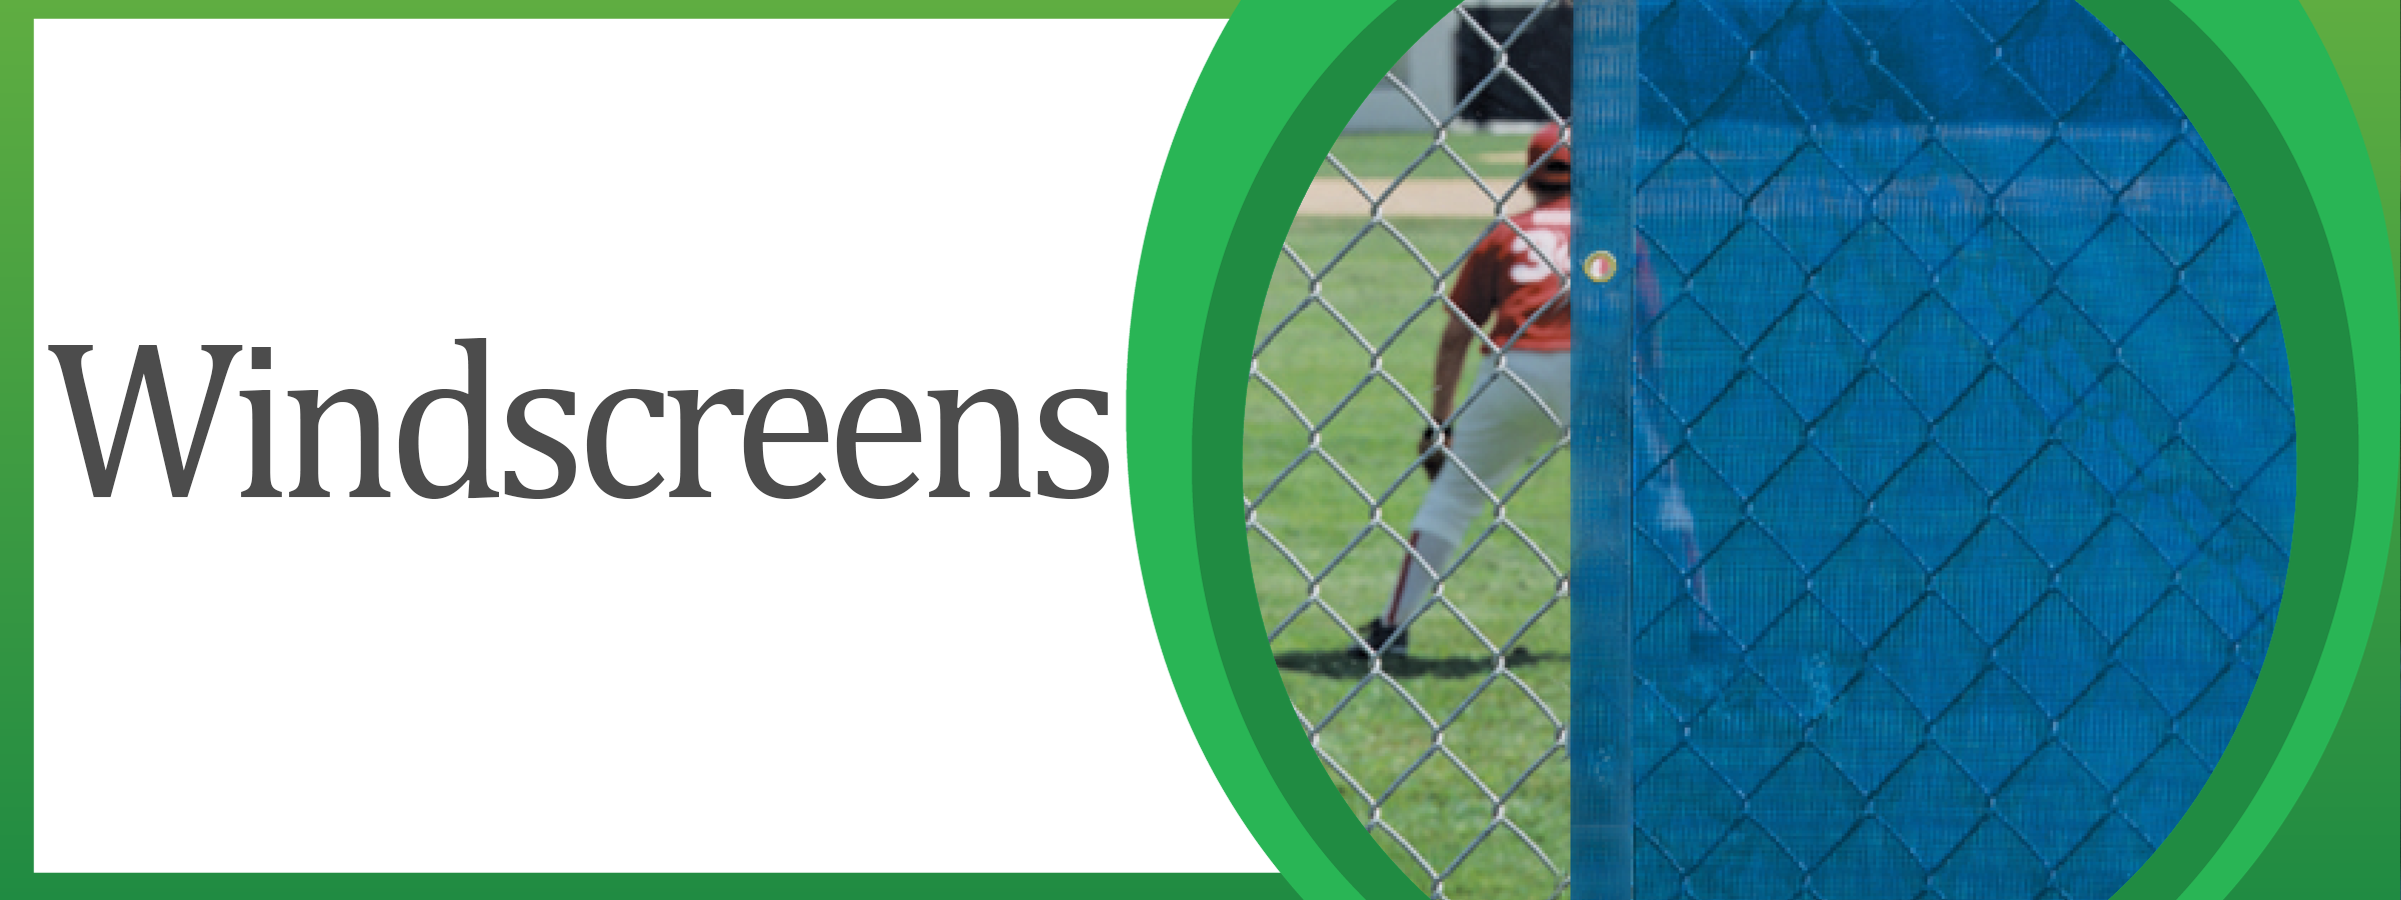 Shop Windscreens For Protecting Players